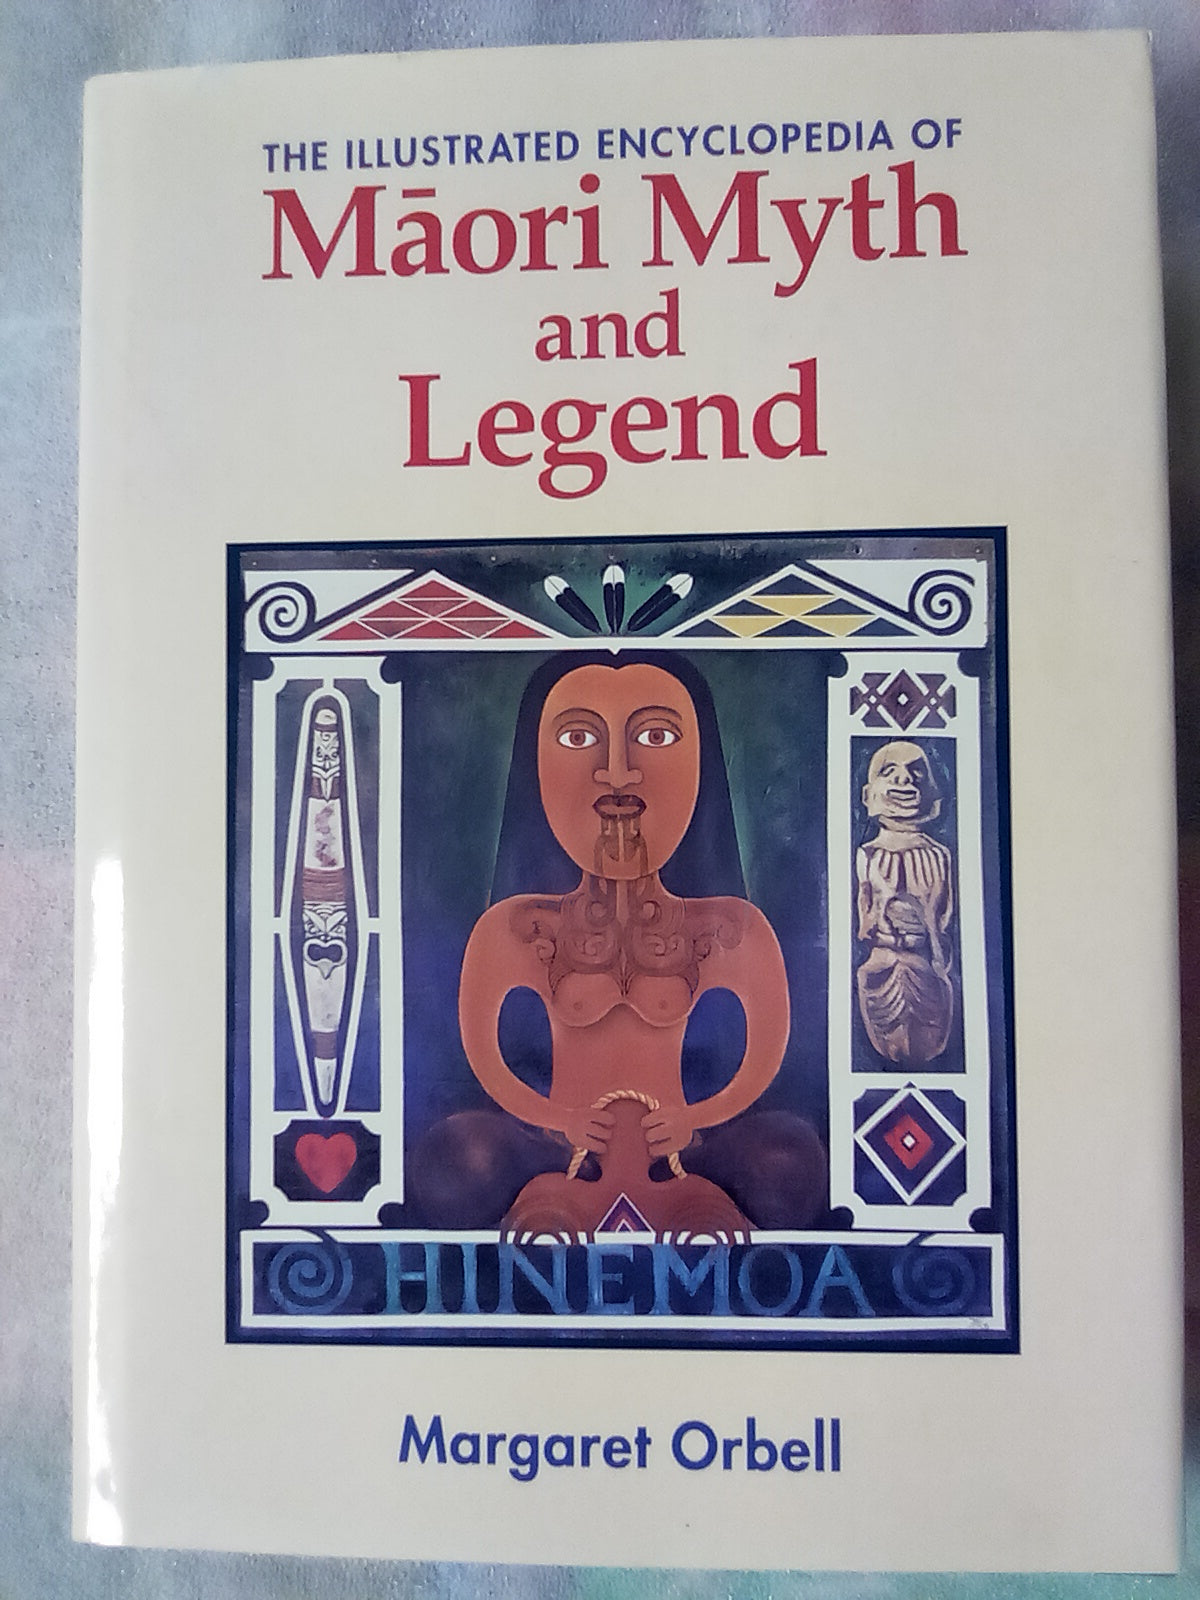 Maori　Atlantis　Myth　Orbe　–　Margaret　and　Legend　by　of　The　Encyclopedia　Illustrated　Books